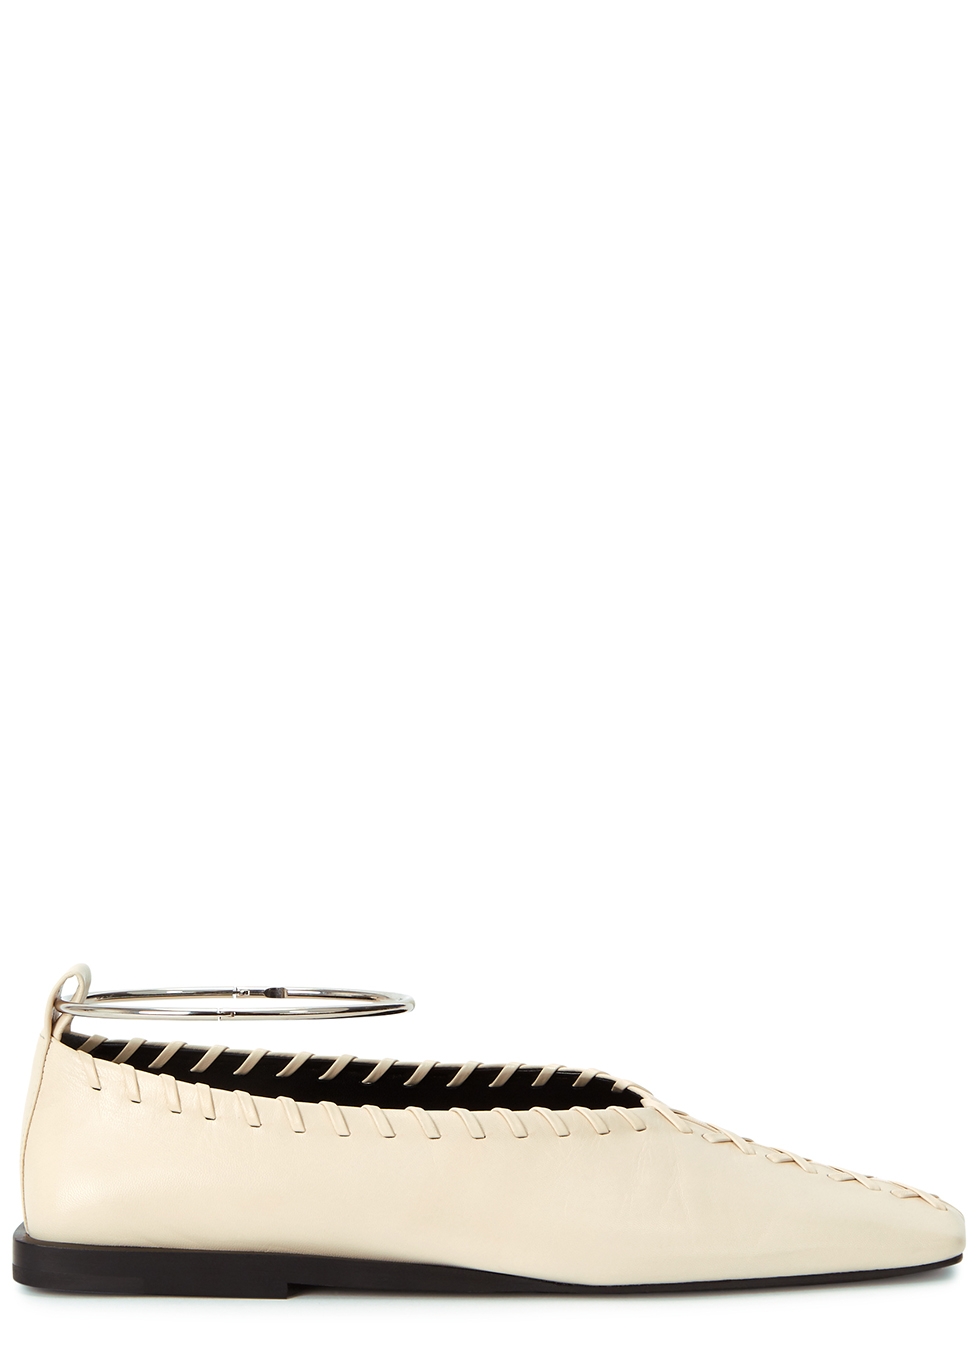 Cream whipstitched leather flats